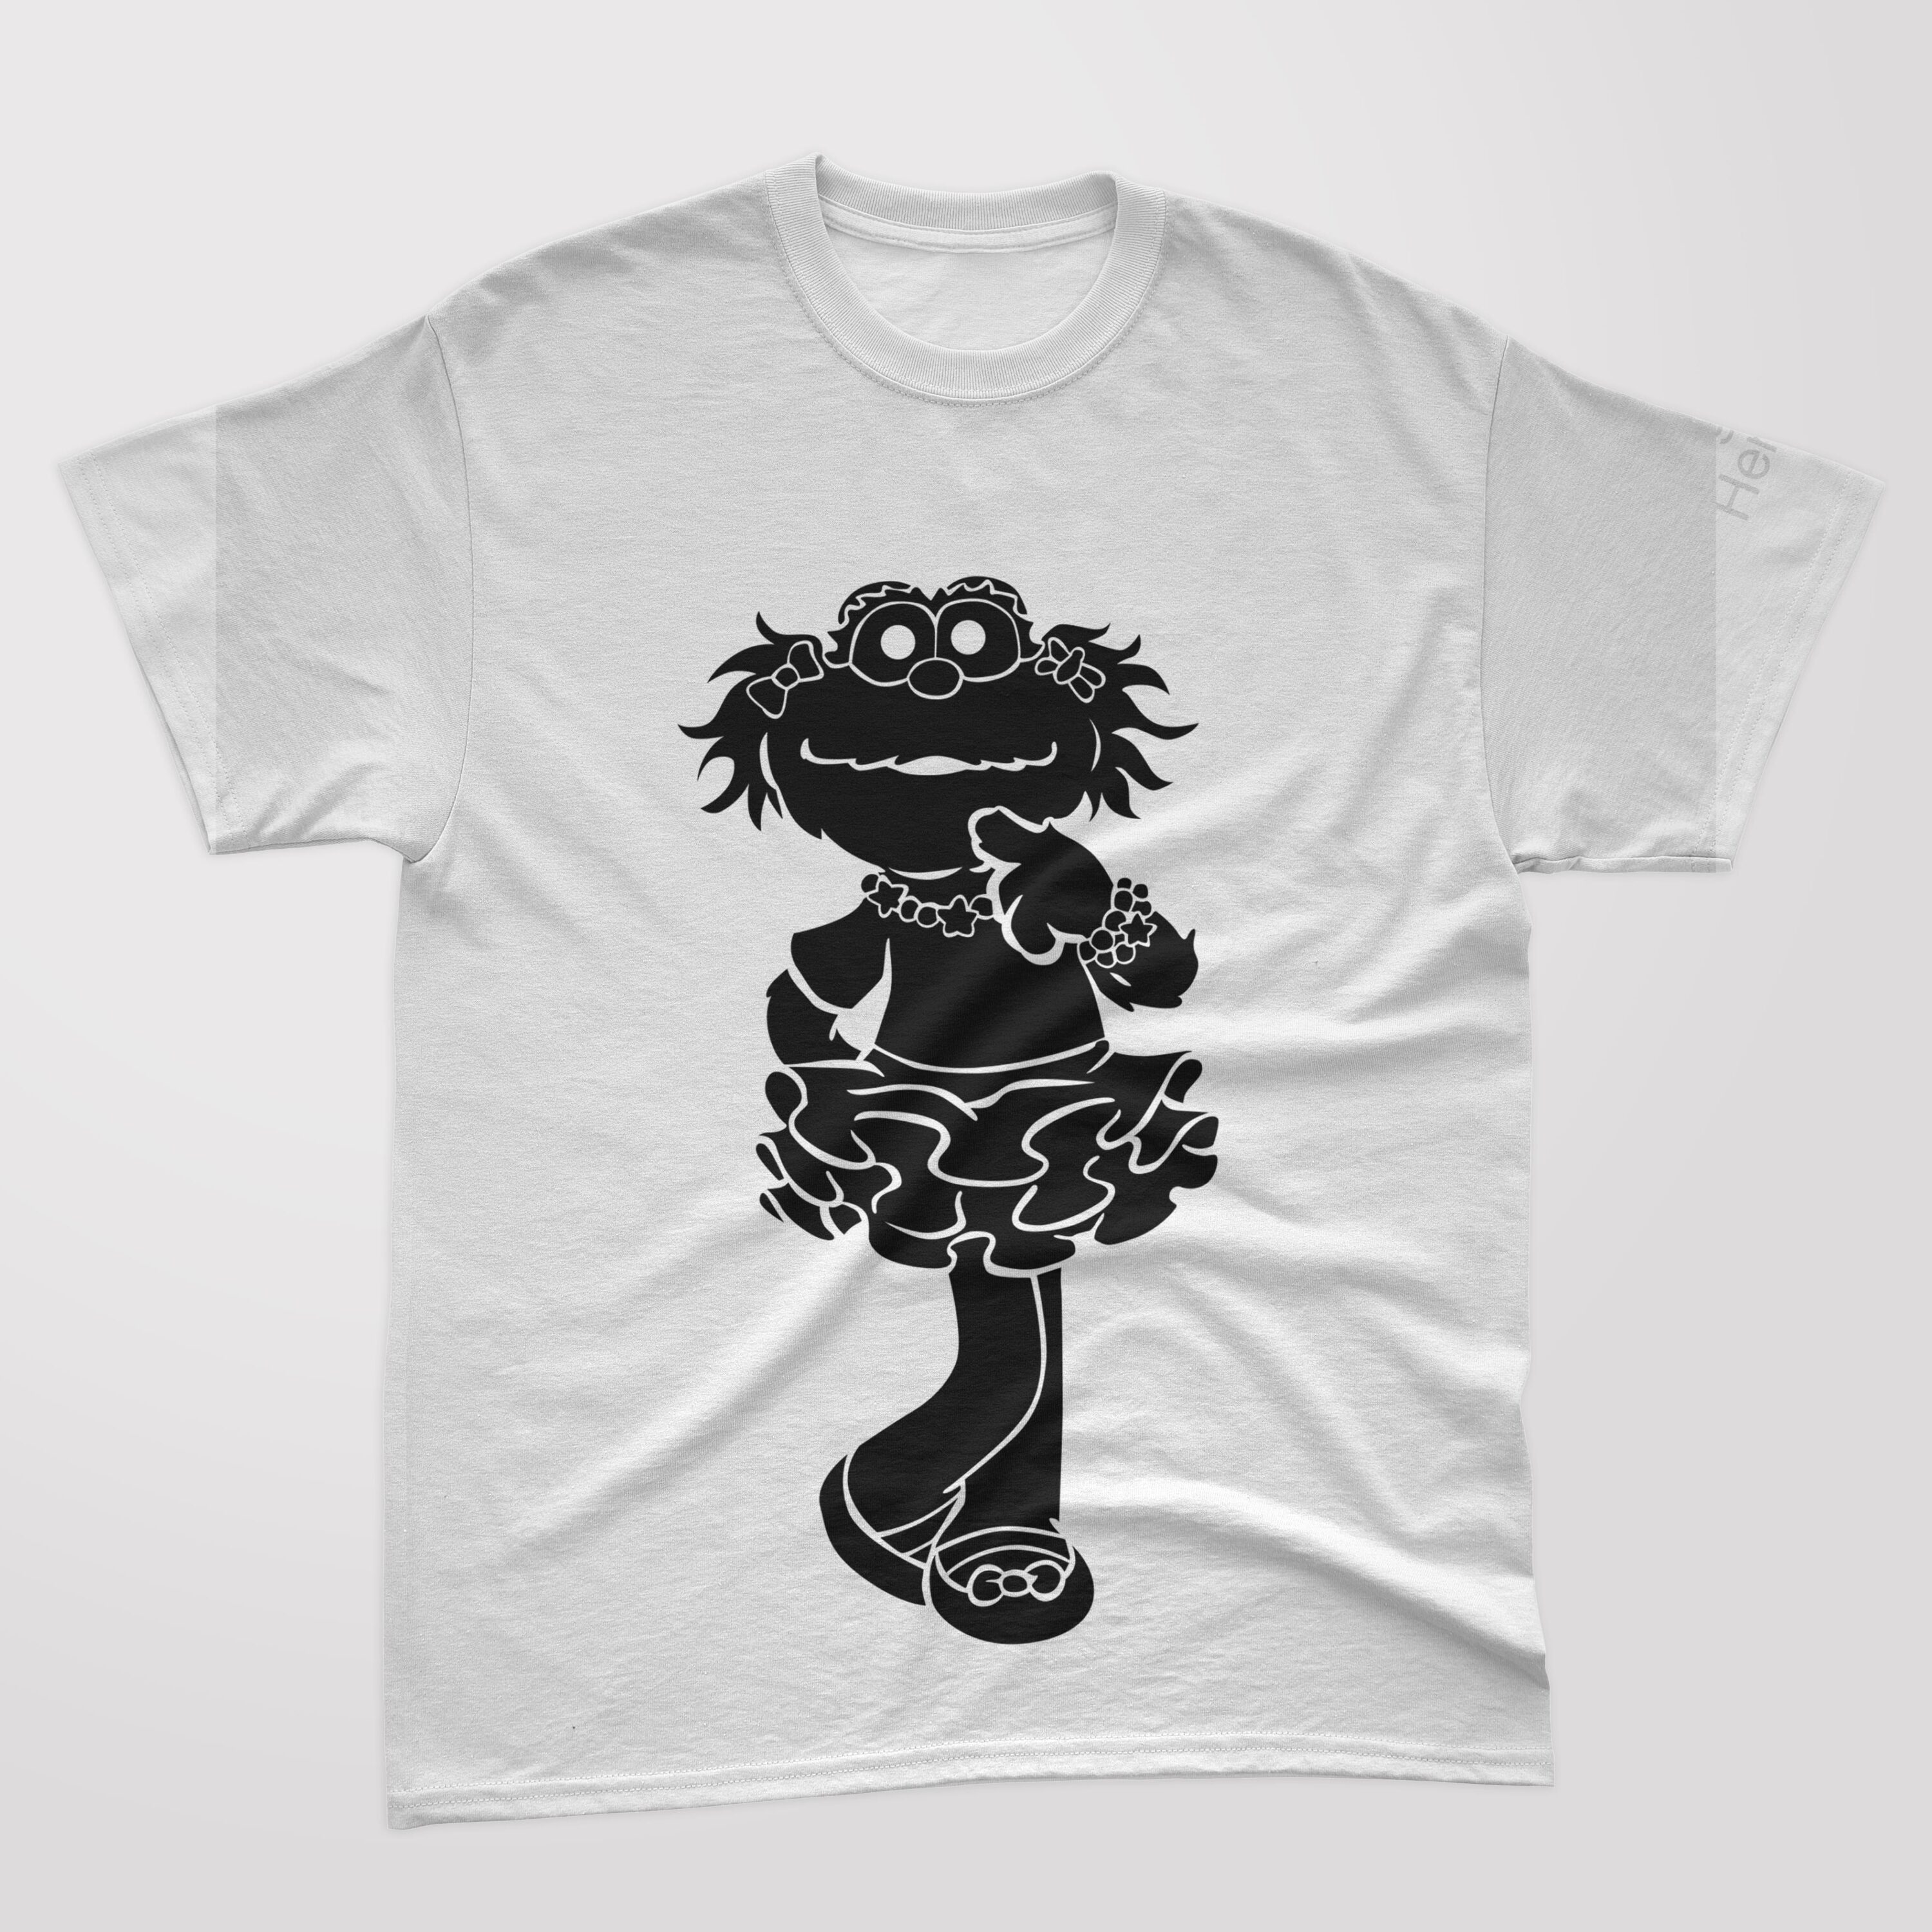 A white t-shirt with a black silhouette dance cookie monster.